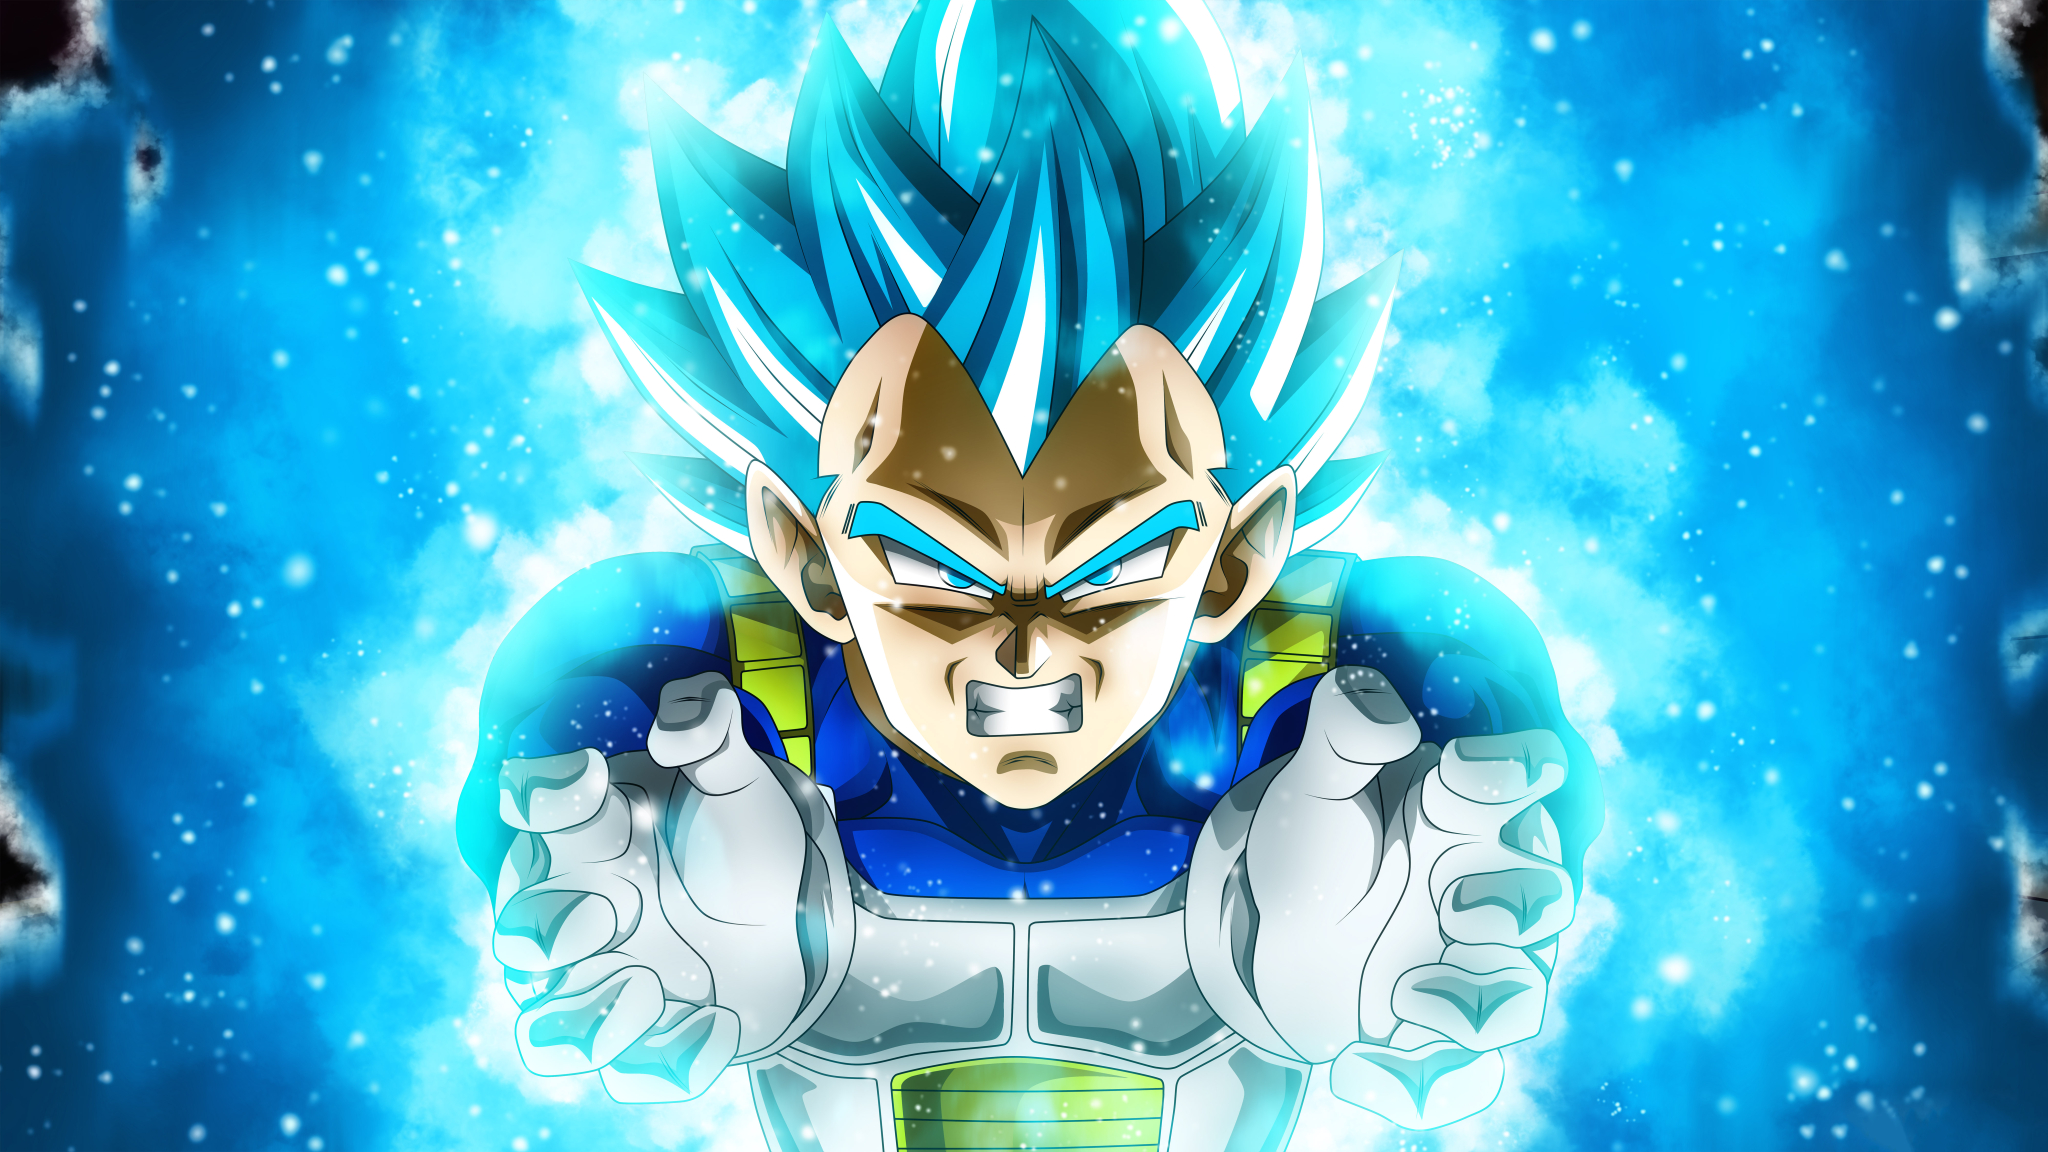 48x1152 Dragon Ball Super 48x1152 Resolution Wallpaper Hd Anime 4k Wallpapers Images Photos And Background Wallpapers Den